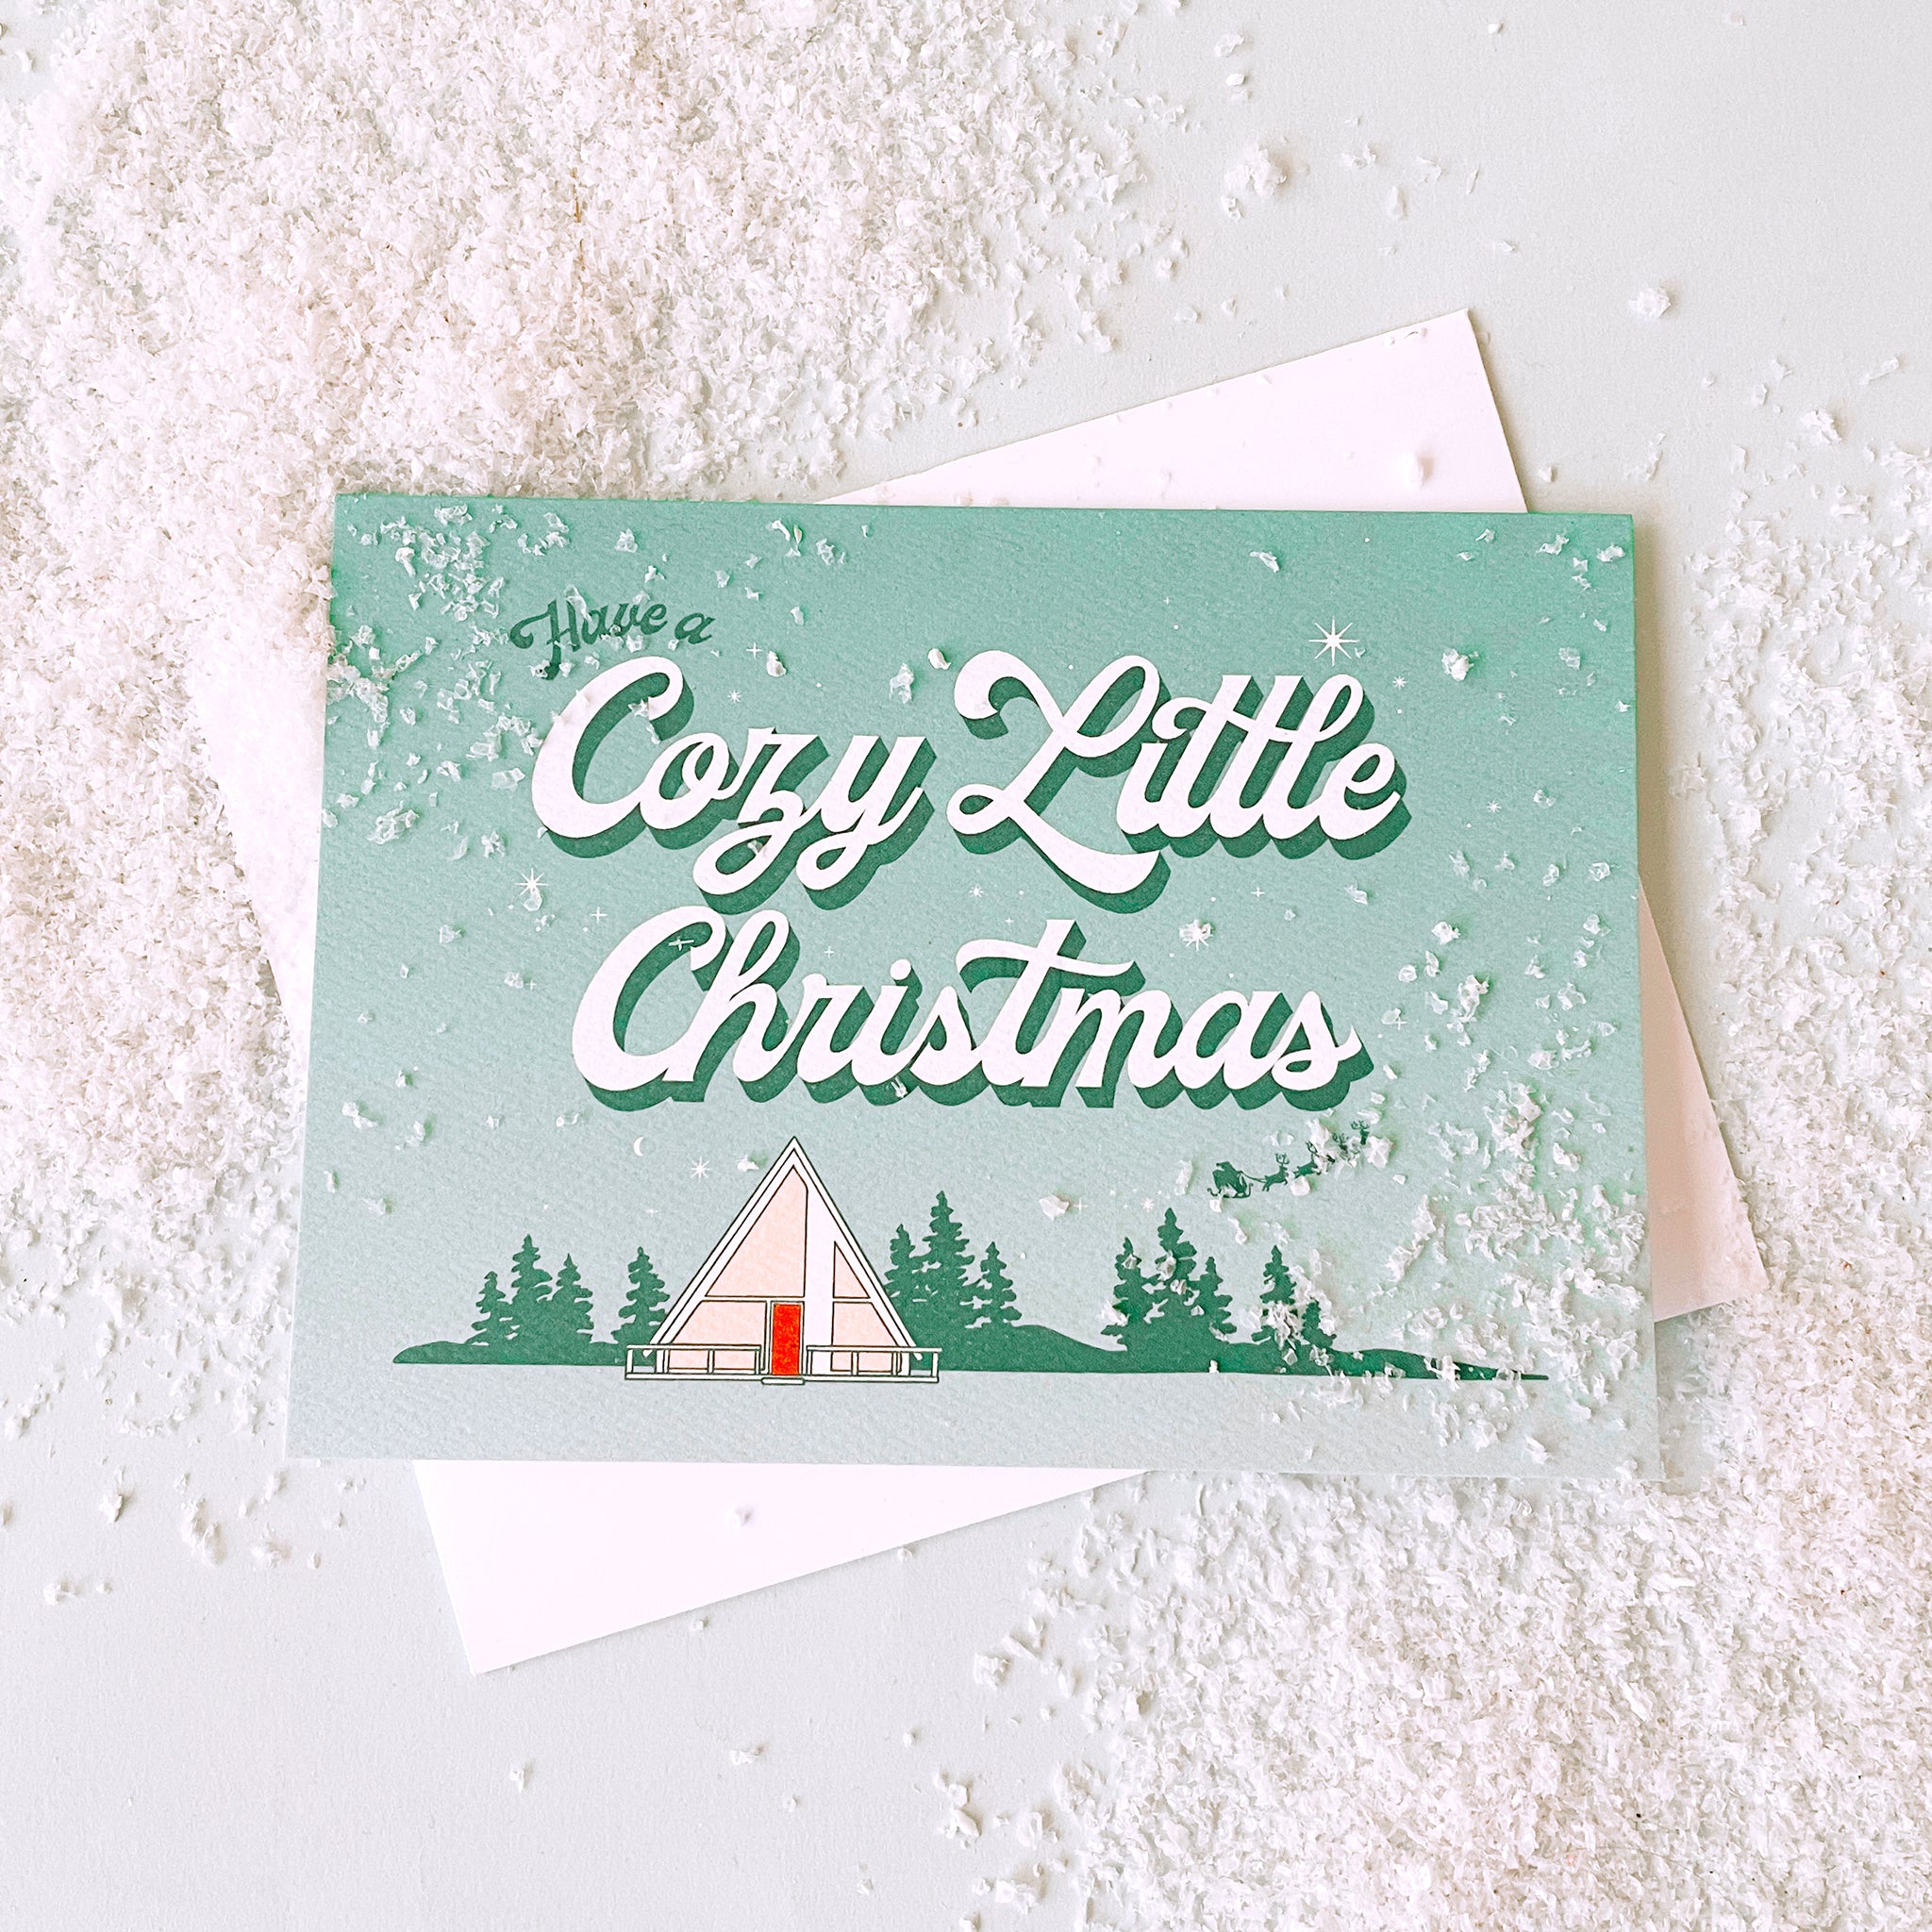 Aqua and white ombre greeting card that reads 'have a cozy little Christmas'. Below the text is a small white tent in a forest scene. A small Santa sleigh and reindeer fly across the sky. The card is accompanied by a white envelope.